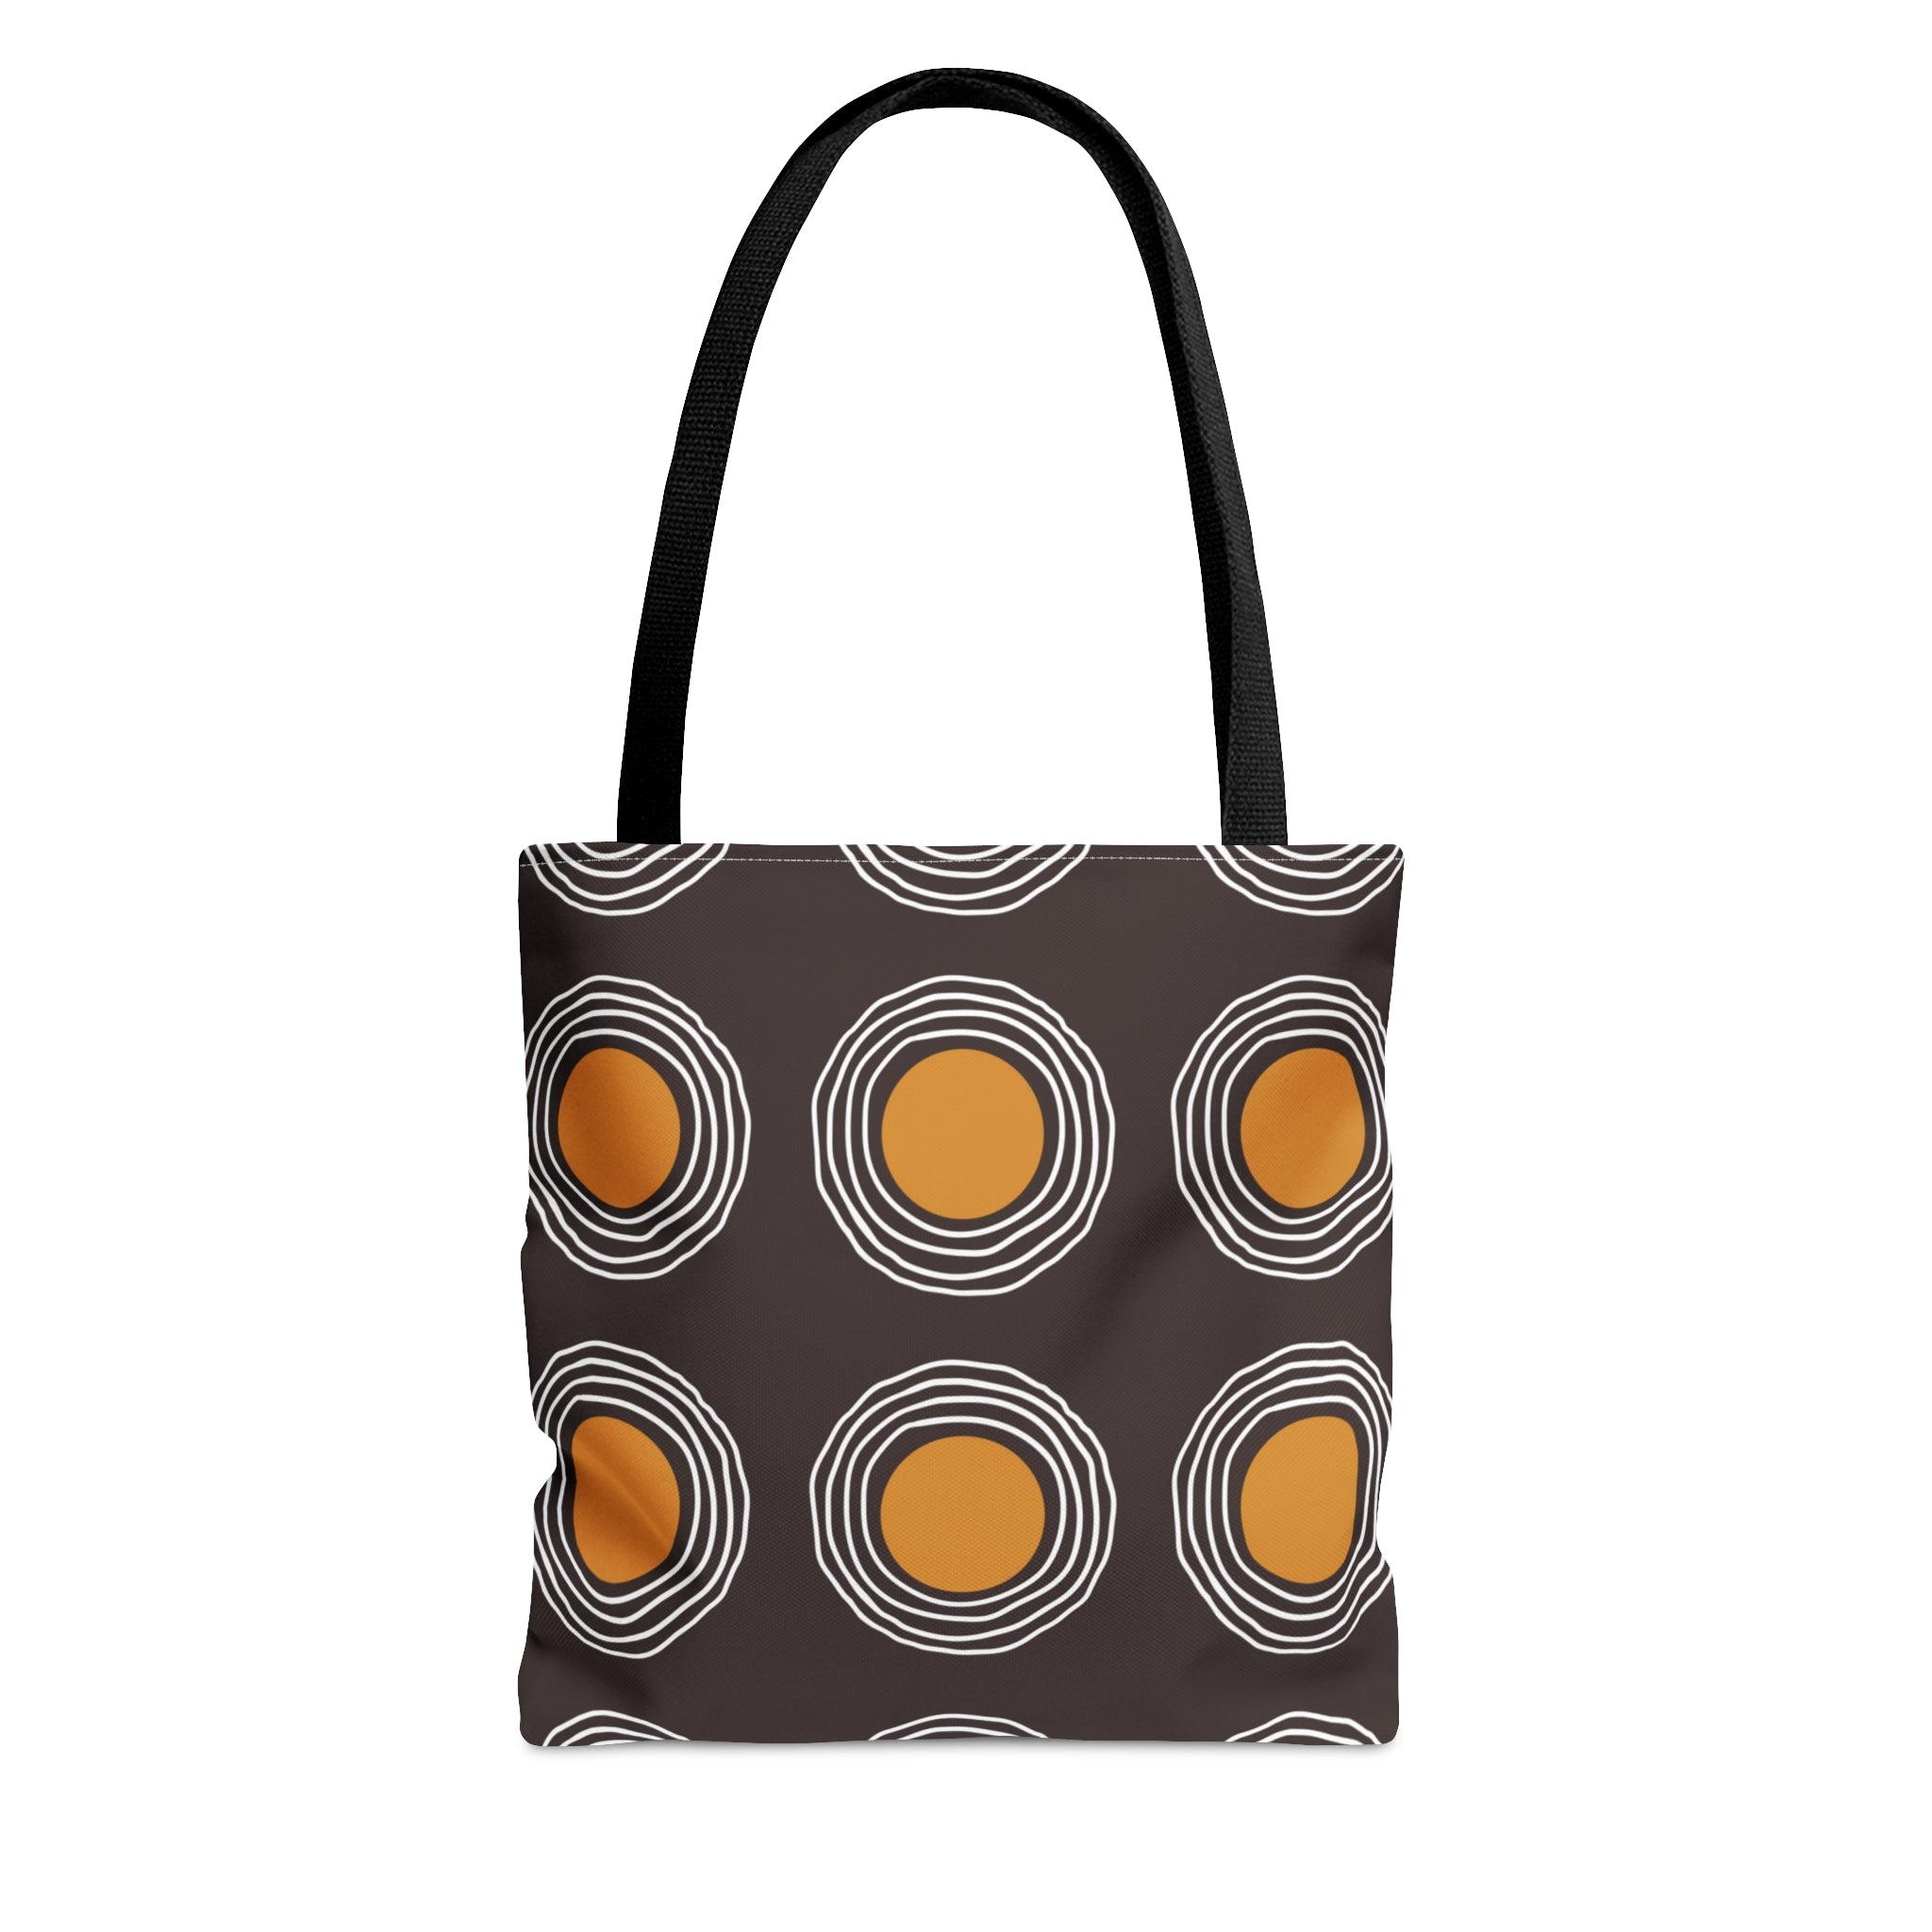 Little Disc Tote Bag